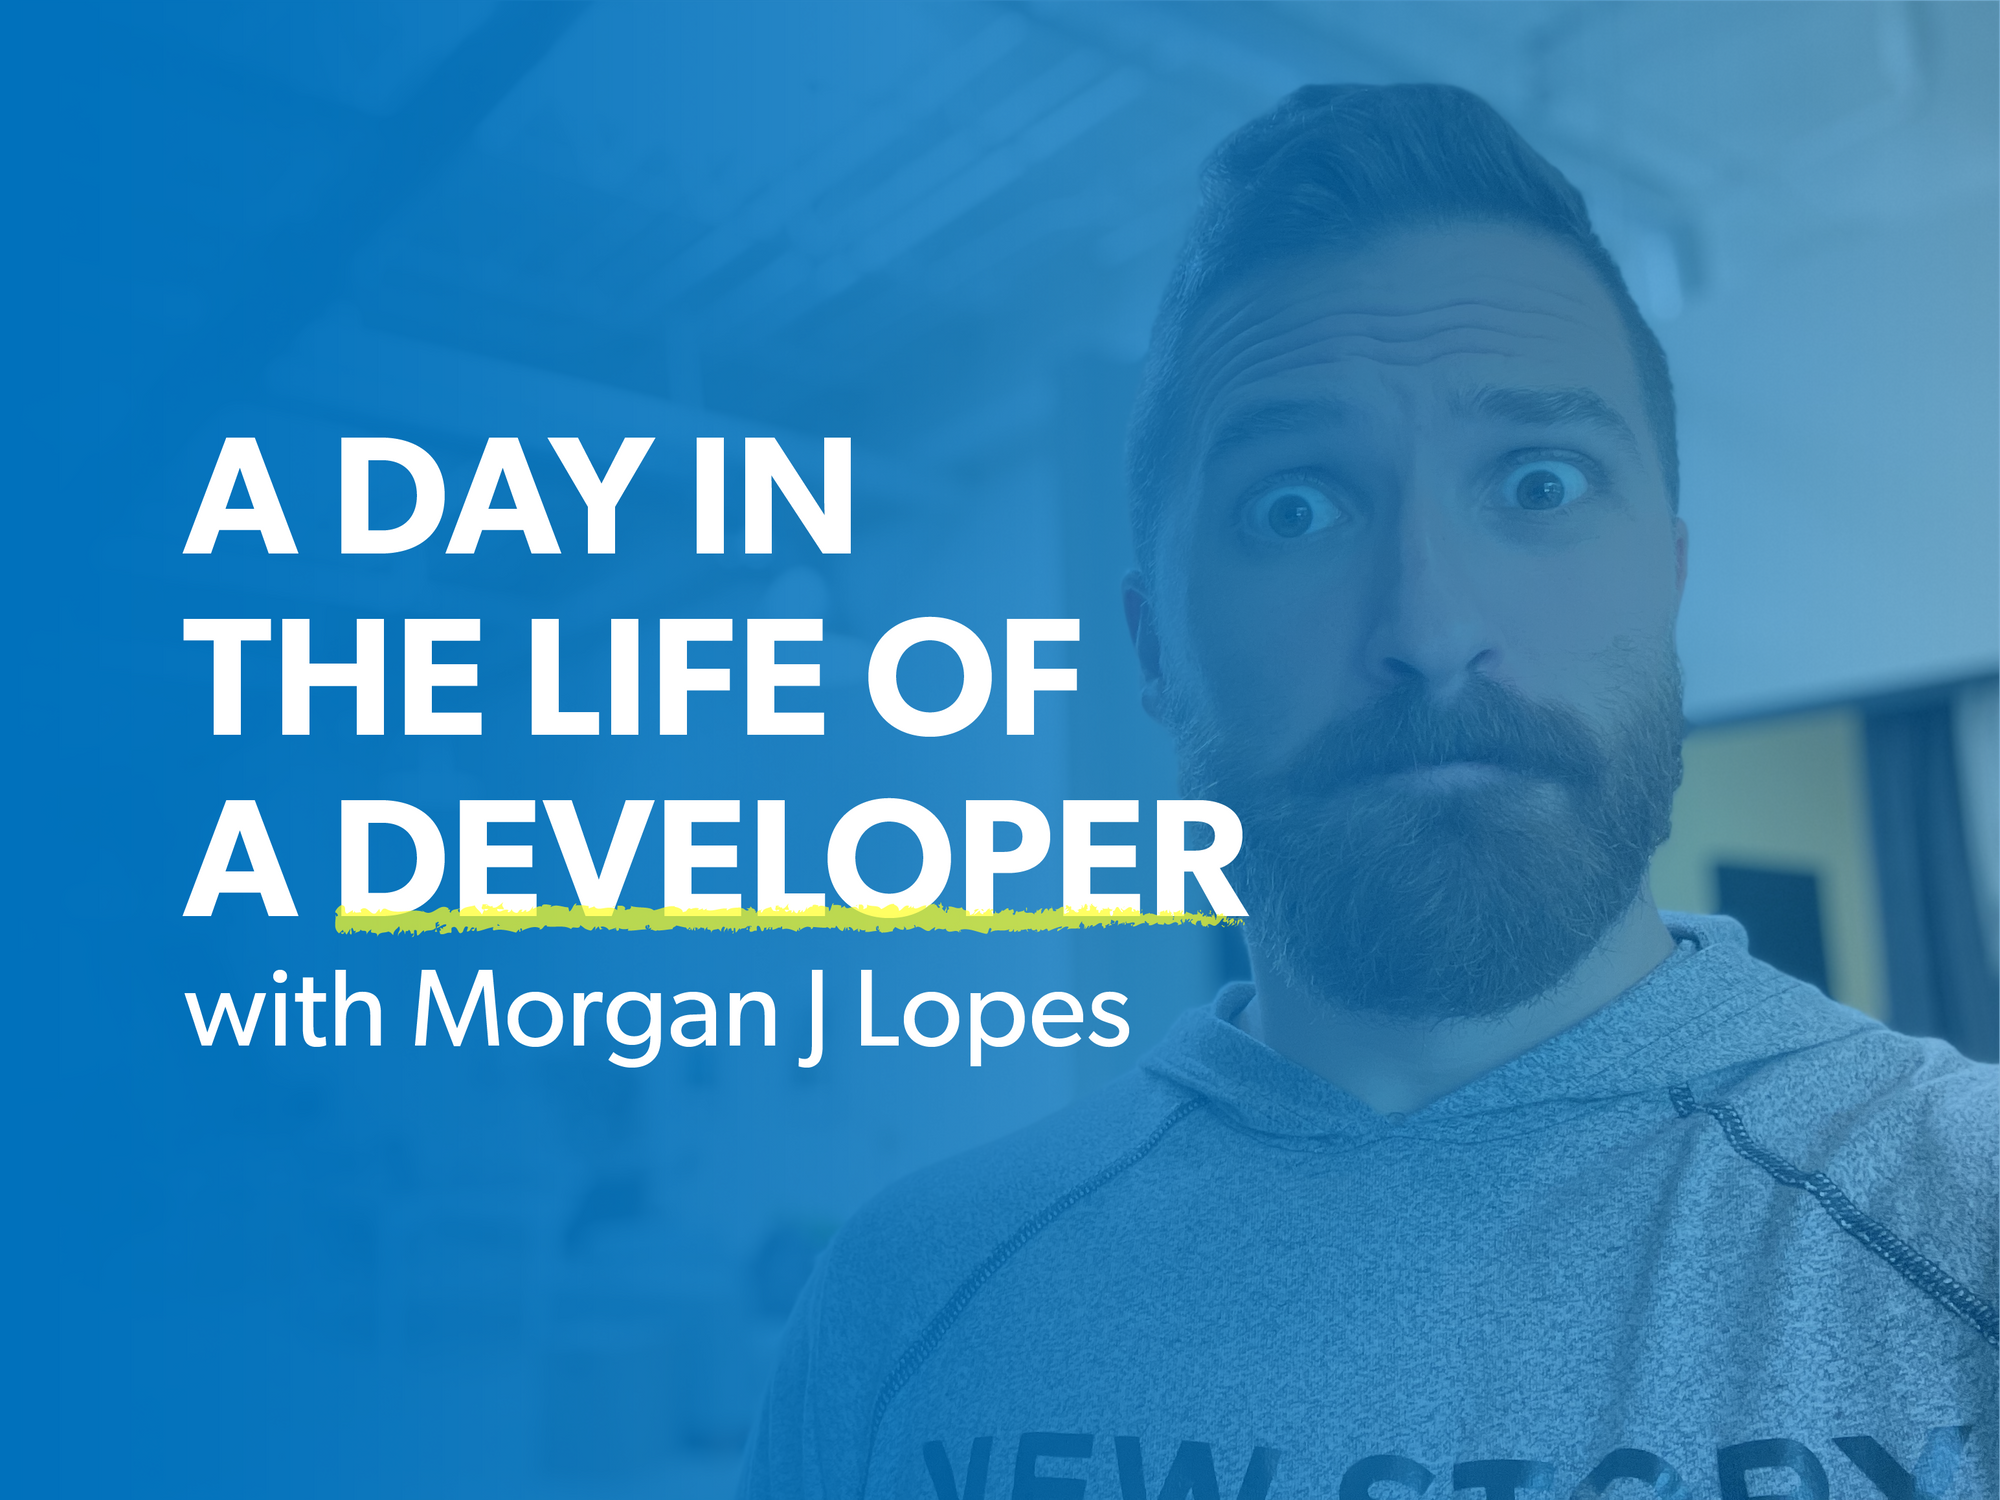 Promotional graphic for "A Day in the Life of a Developer" Presentation